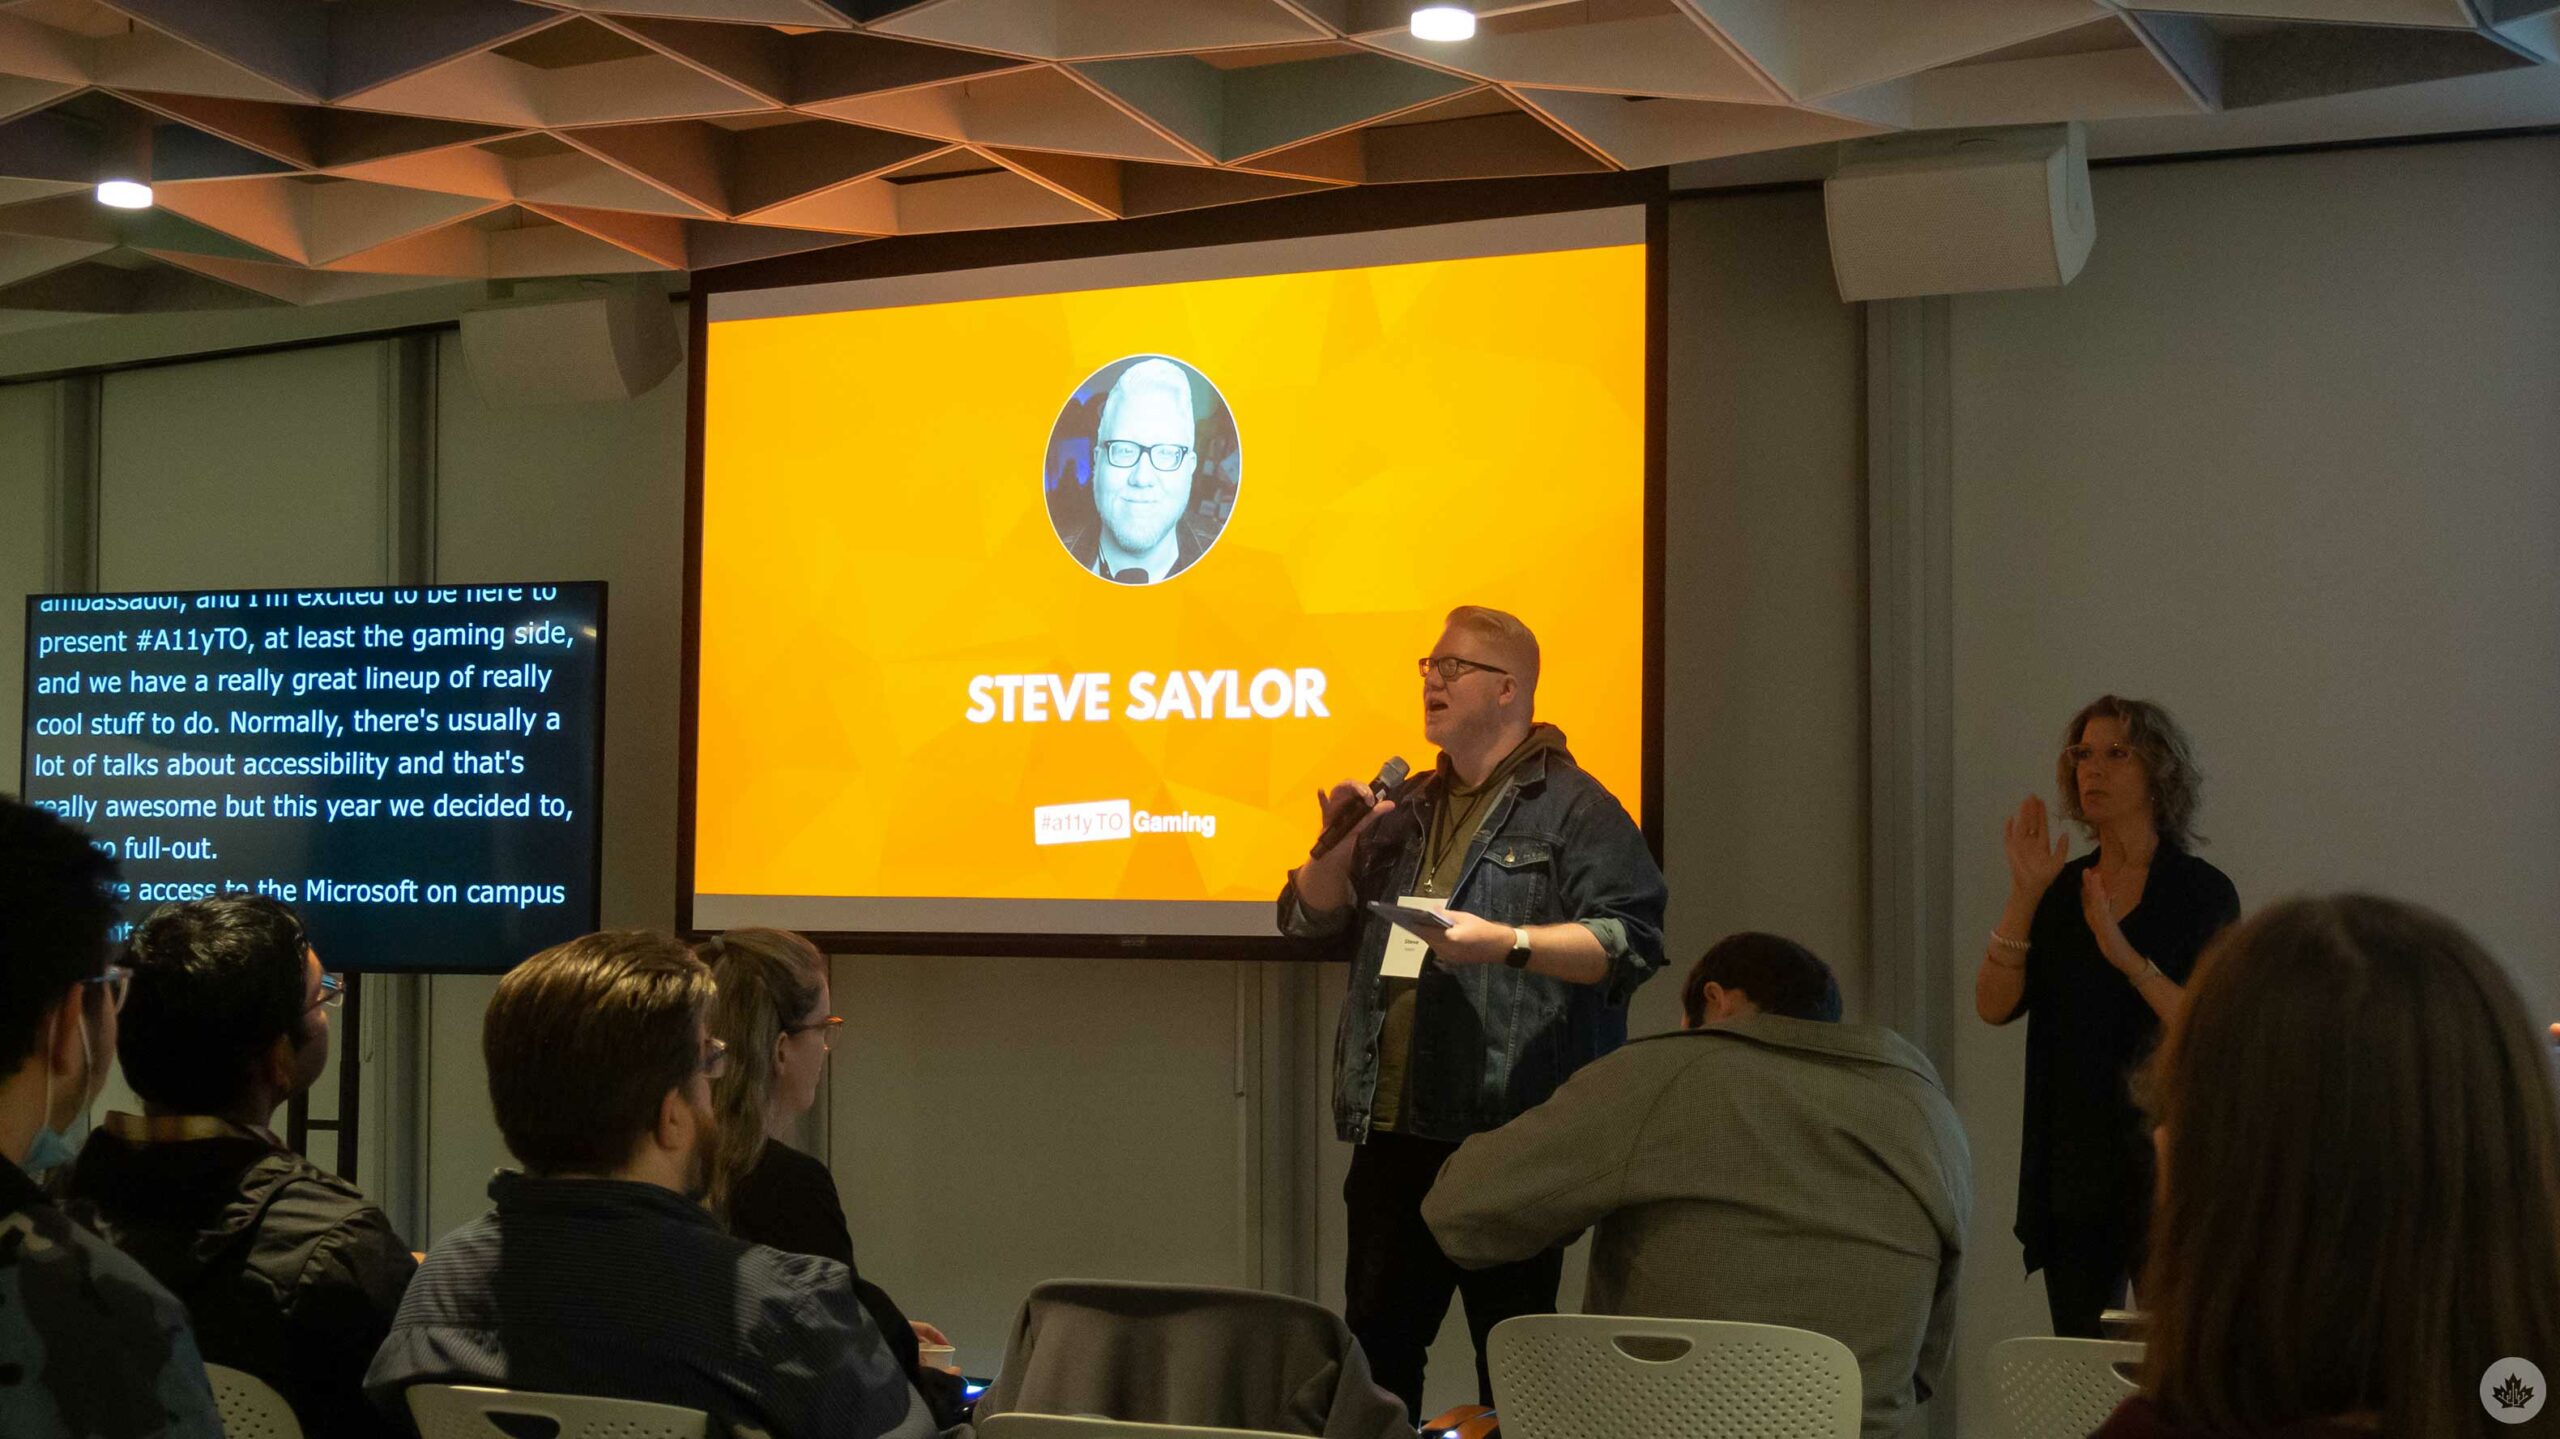 Accessibility consultant Steve Saylor hosting the #a11yTO Gaming conference in Toronto.